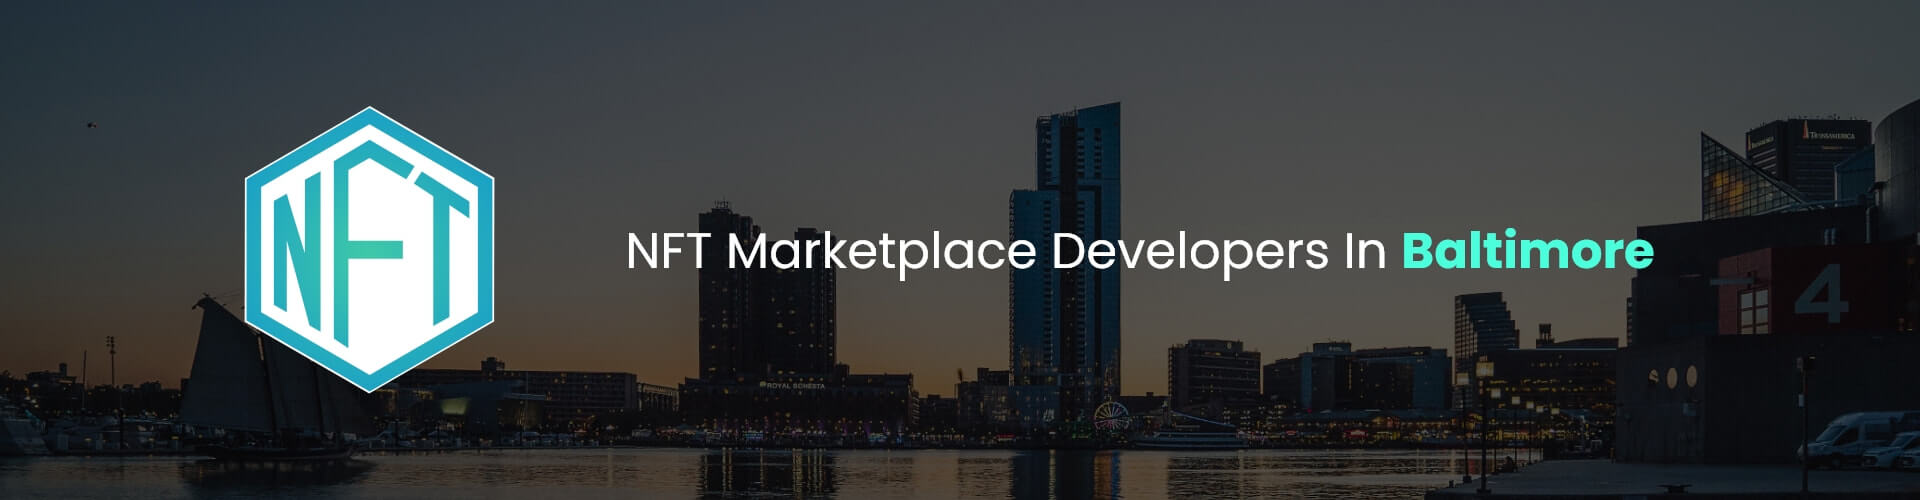 hire nft marketplace developers in baltimore